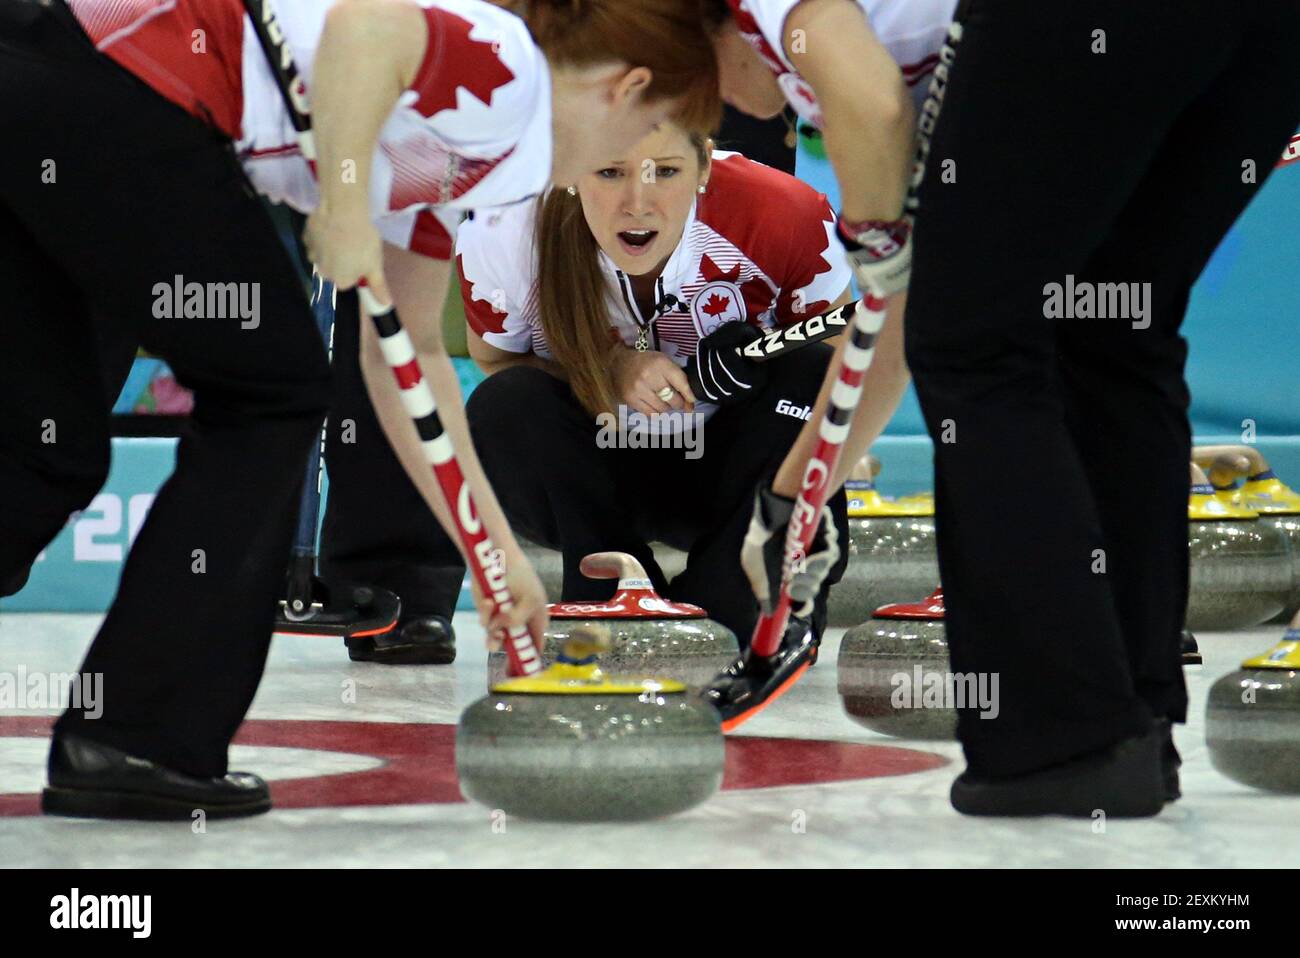 Canada's Kaitlyn Lawes yells to teammates during their victory over Great Britain in the women's curling semifinals at the Ice Cube Curling Center during the Winter Olympics in Sochi, Russia, Wednesday, Feb. 19, 2014. (Photo by Brian Cassella/Chicago Tribune/MCT/Sipa USA) Stock Photo